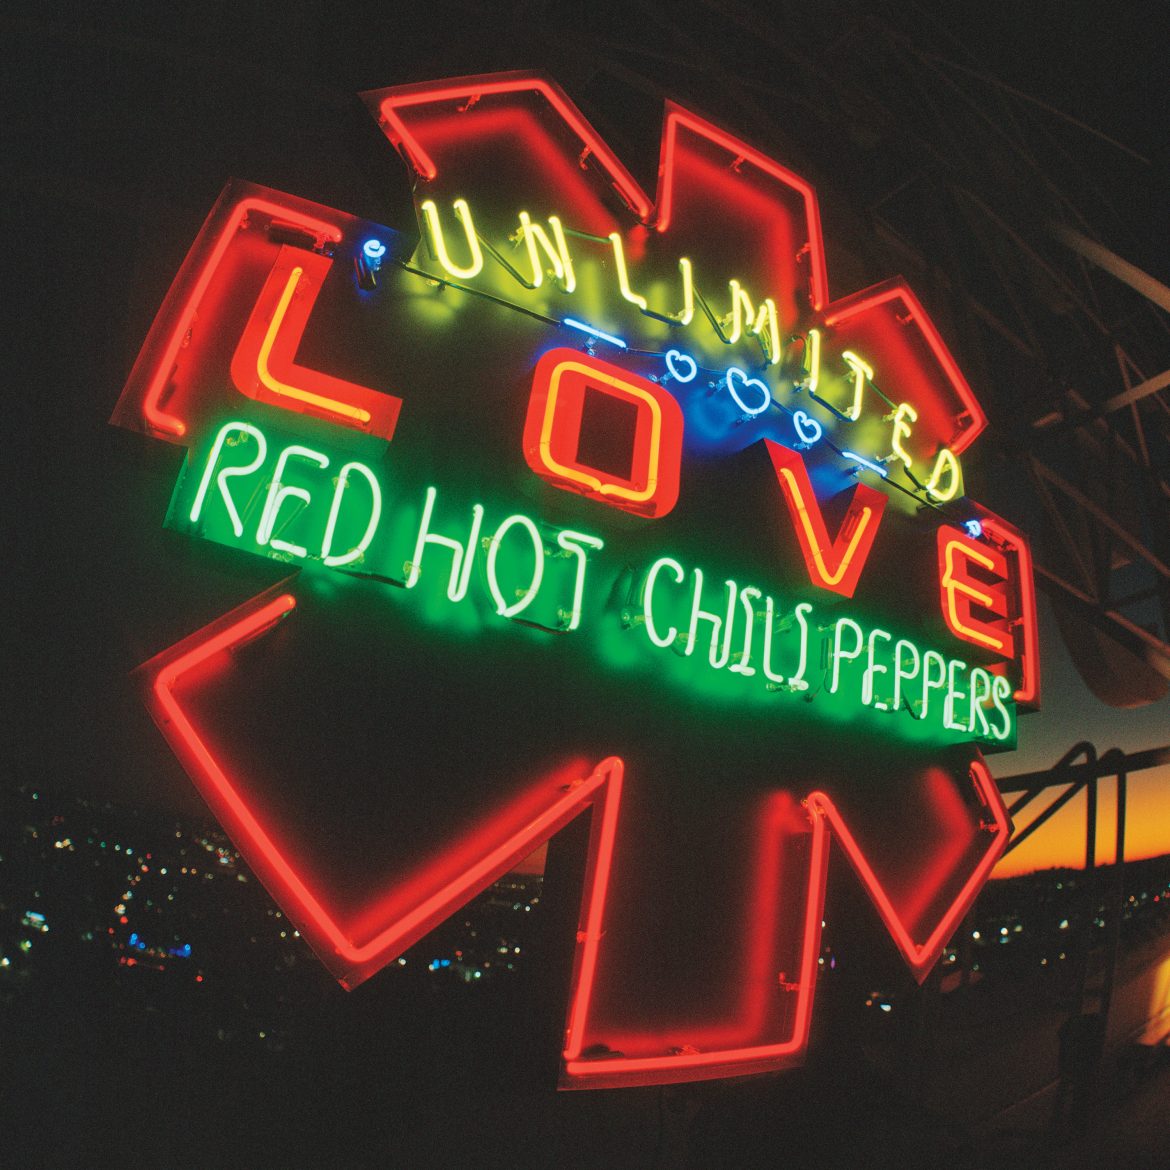 Red Hot Chili Peppers new album Unlimited Love is a tribute to love and heartache